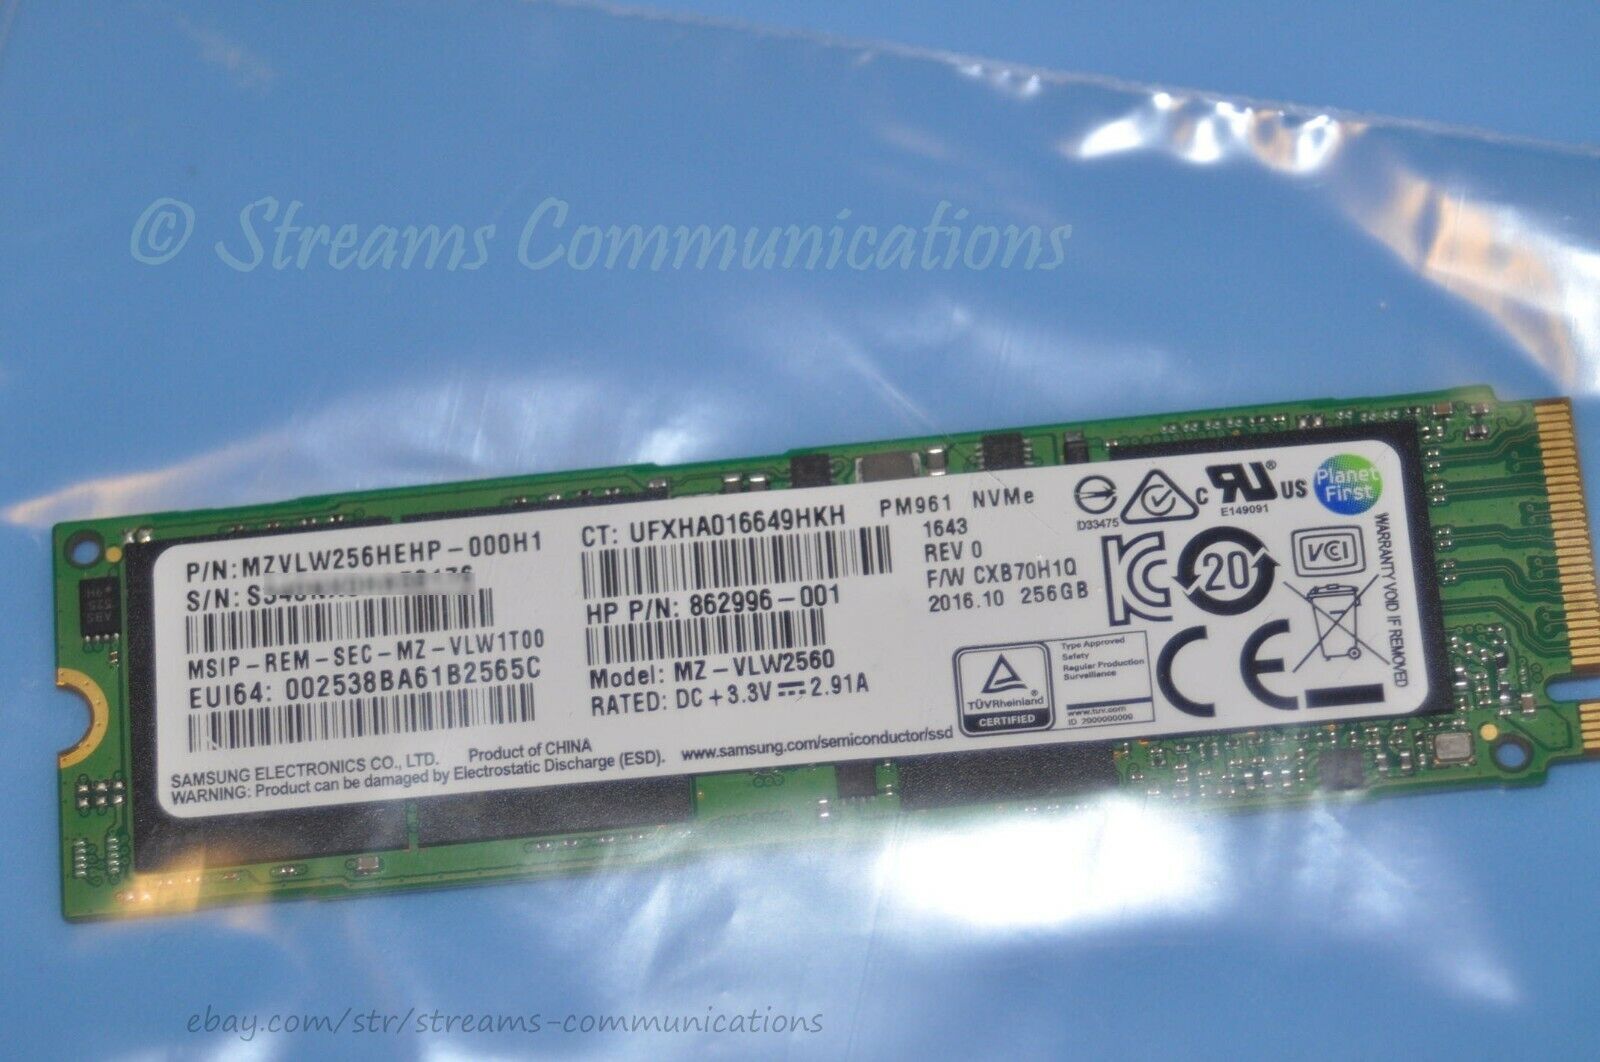 HP 13T-4200 256GB Samsung M.2 NVMe PCIe SSD Solid State Drive MZ-VLW256